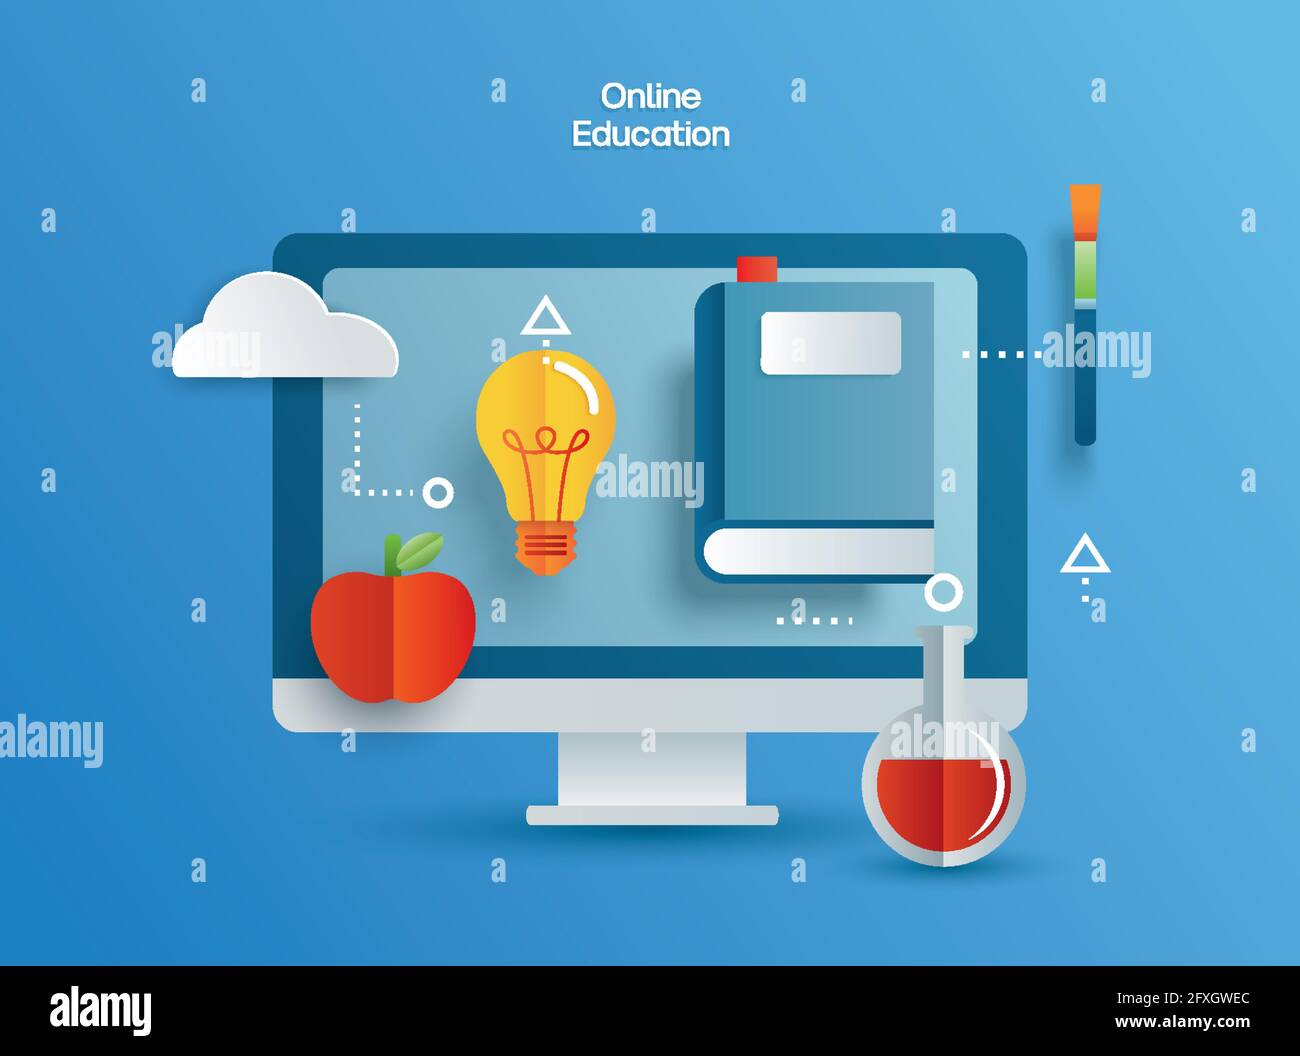 Online education learning on computer. Learning at home with social distancing concept. Stock Vector